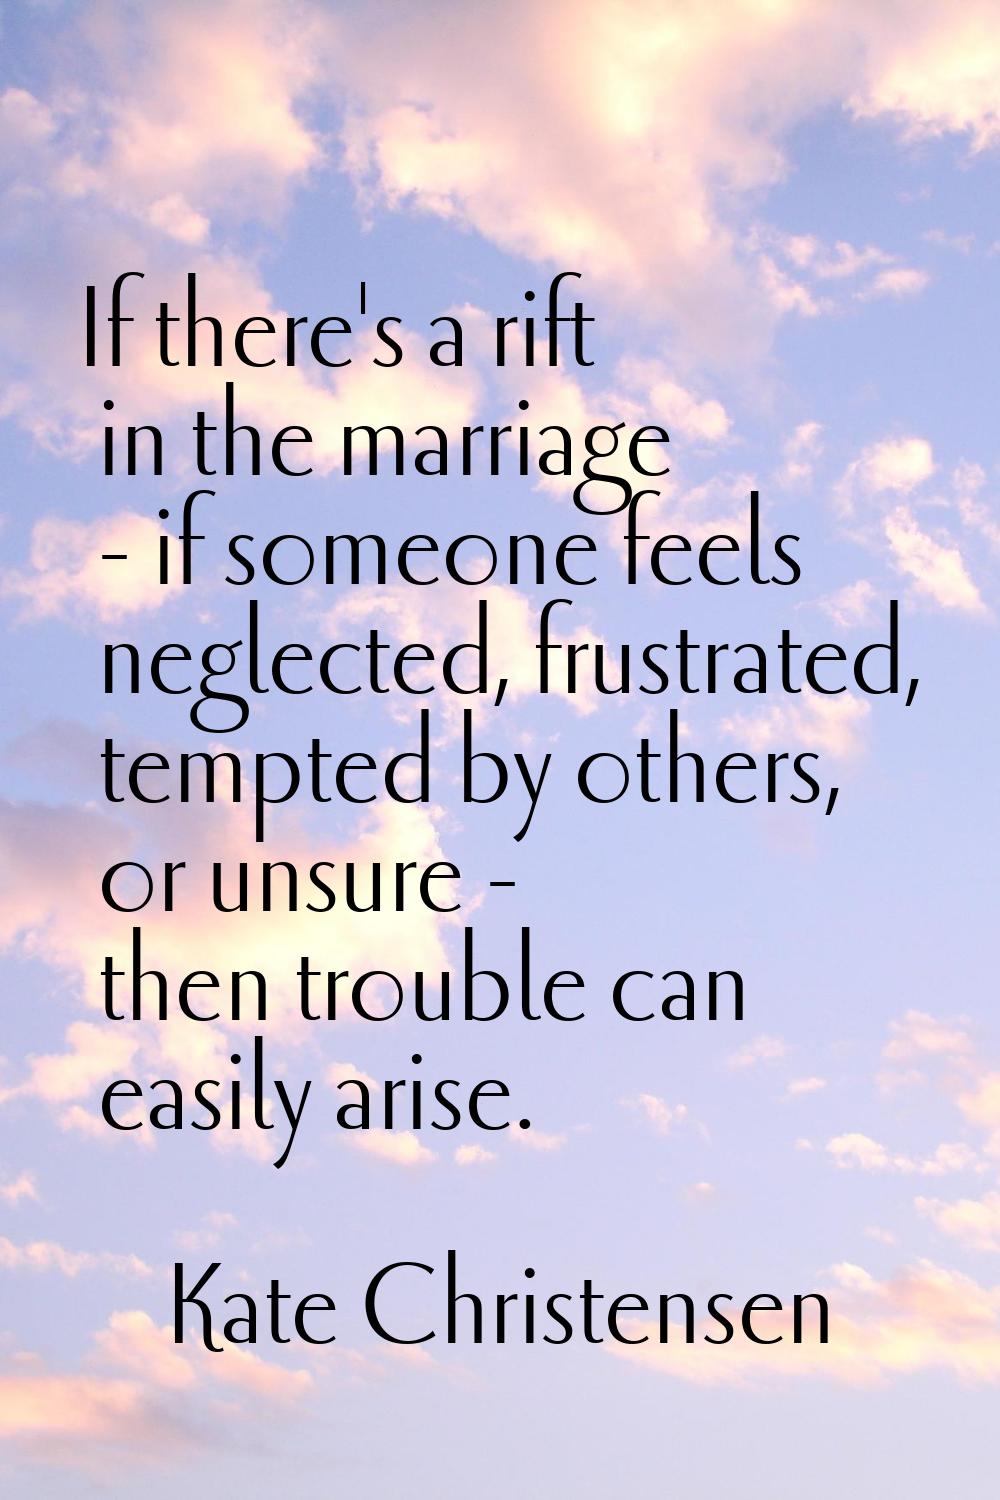 If there's a rift in the marriage - if someone feels neglected, frustrated, tempted by others, or u